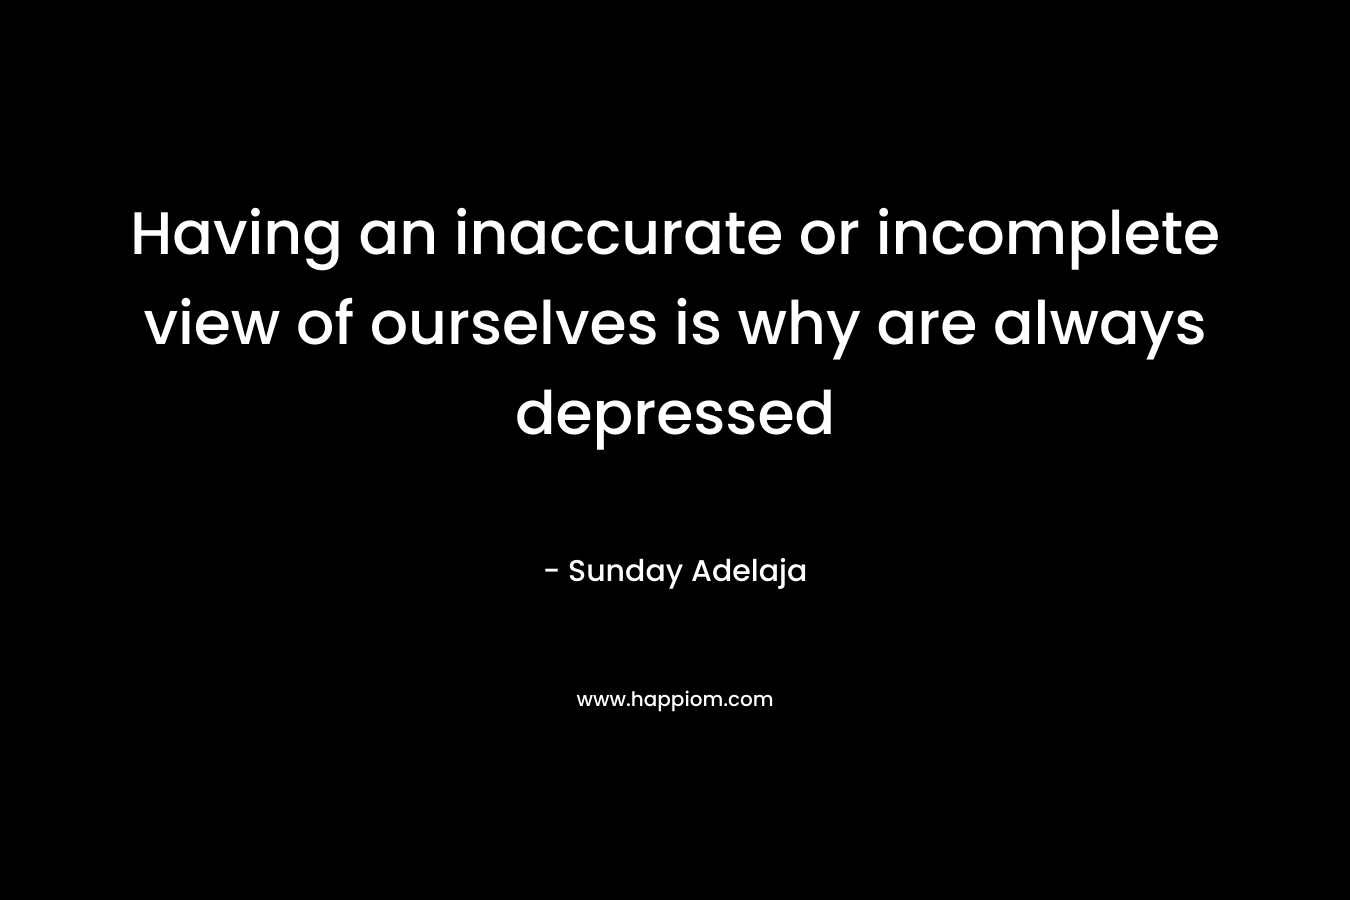 Having an inaccurate or incomplete view of ourselves is why are always depressed